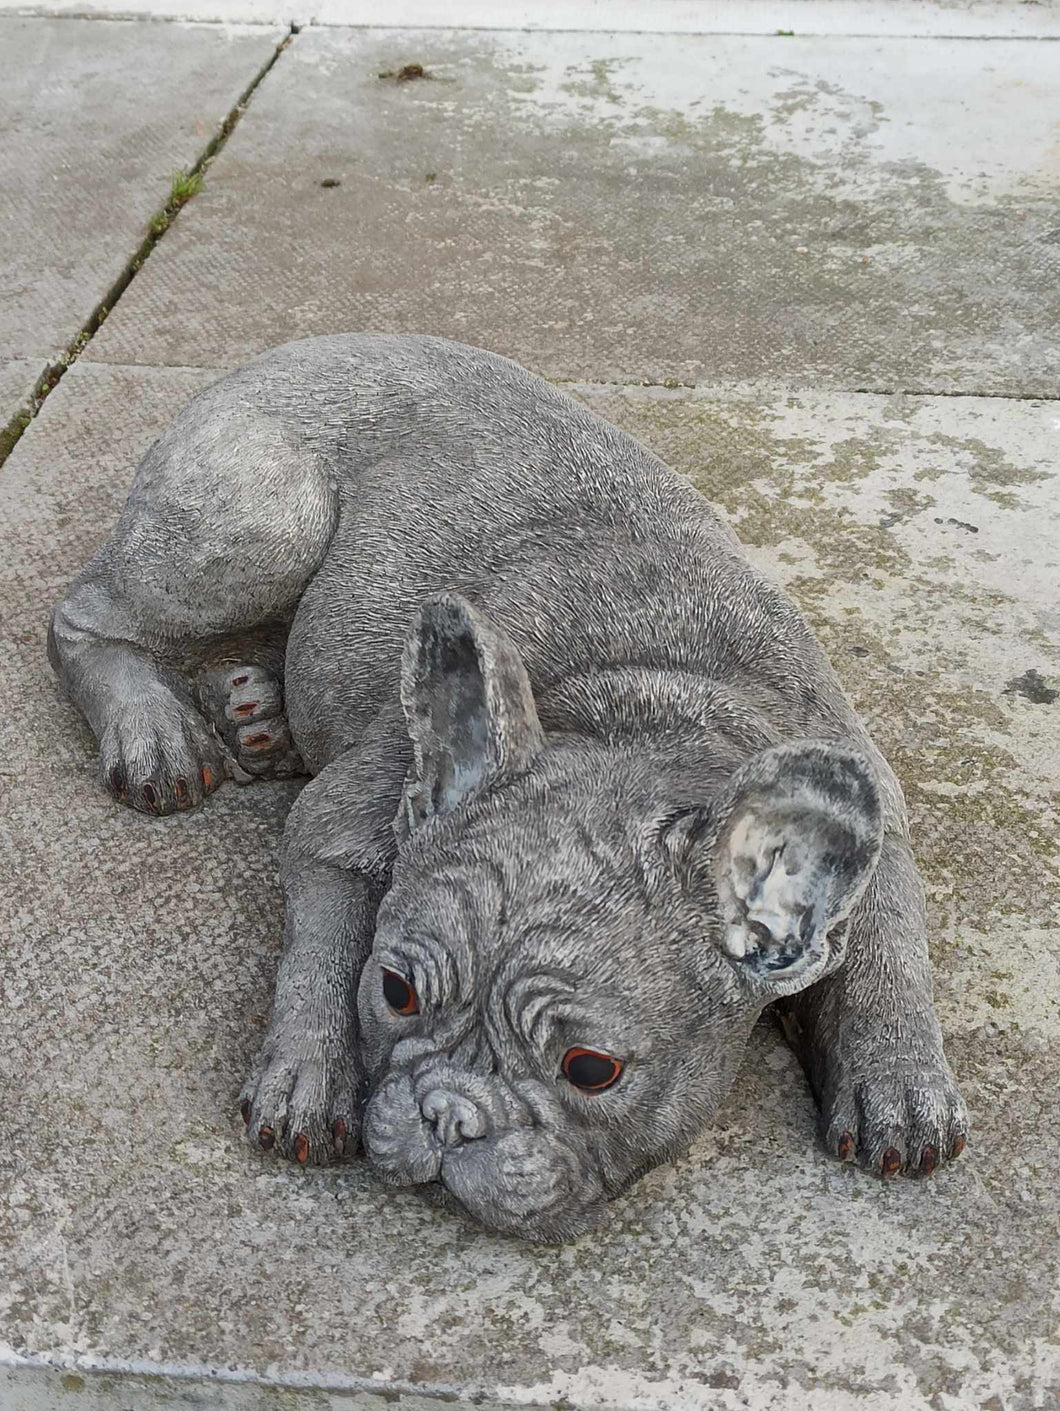 Stone French Bulldog Statue Frenchie Puppy Large Solid Statue Amazing Detail